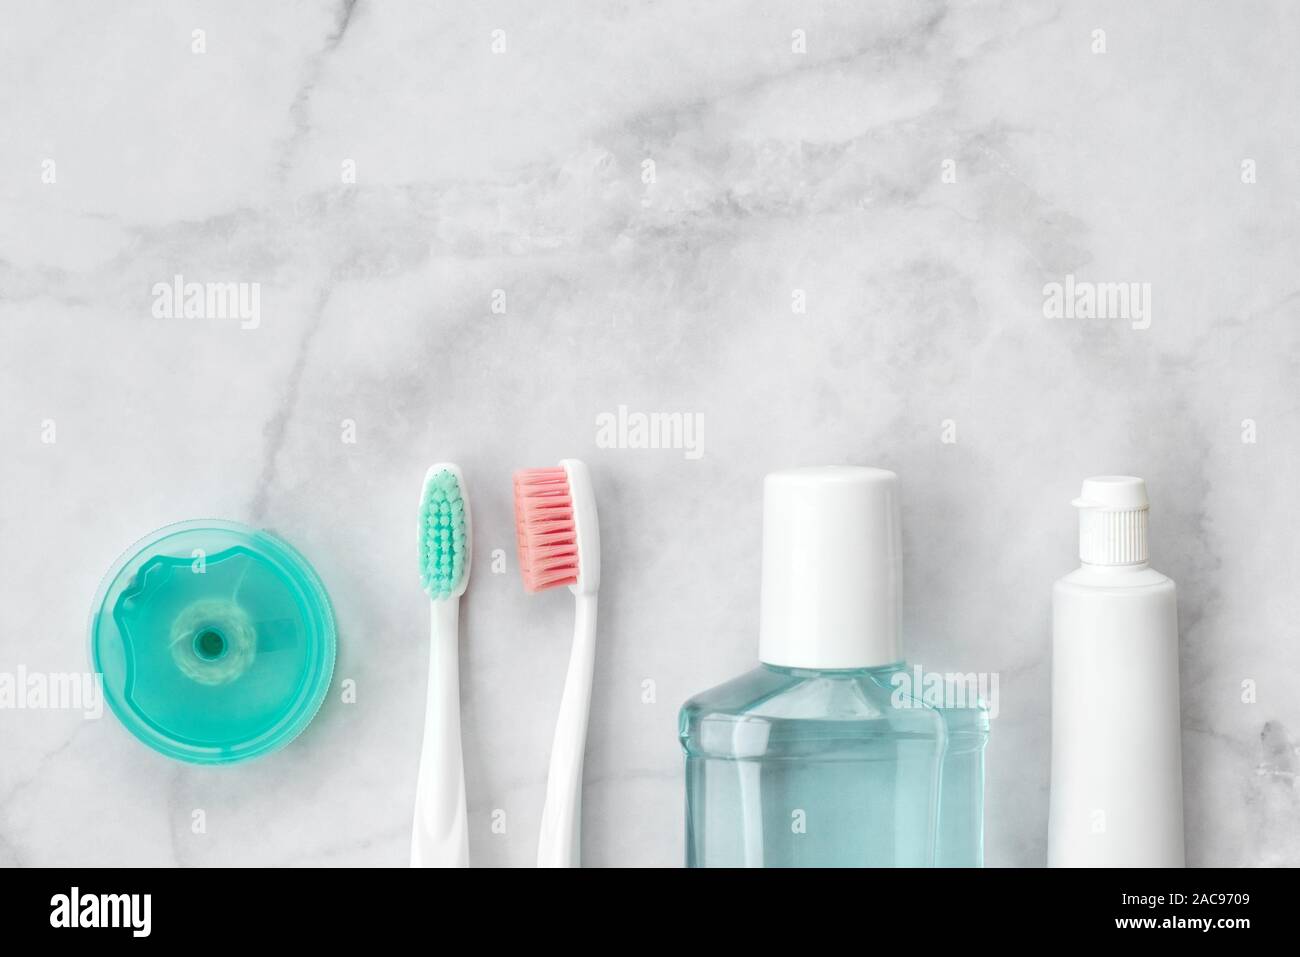 Set of pink and turquoise blue toothbrushes, toothpaste and other tools on marble background. Dental and health care concept. Top view, flat lay. Free Stock Photo